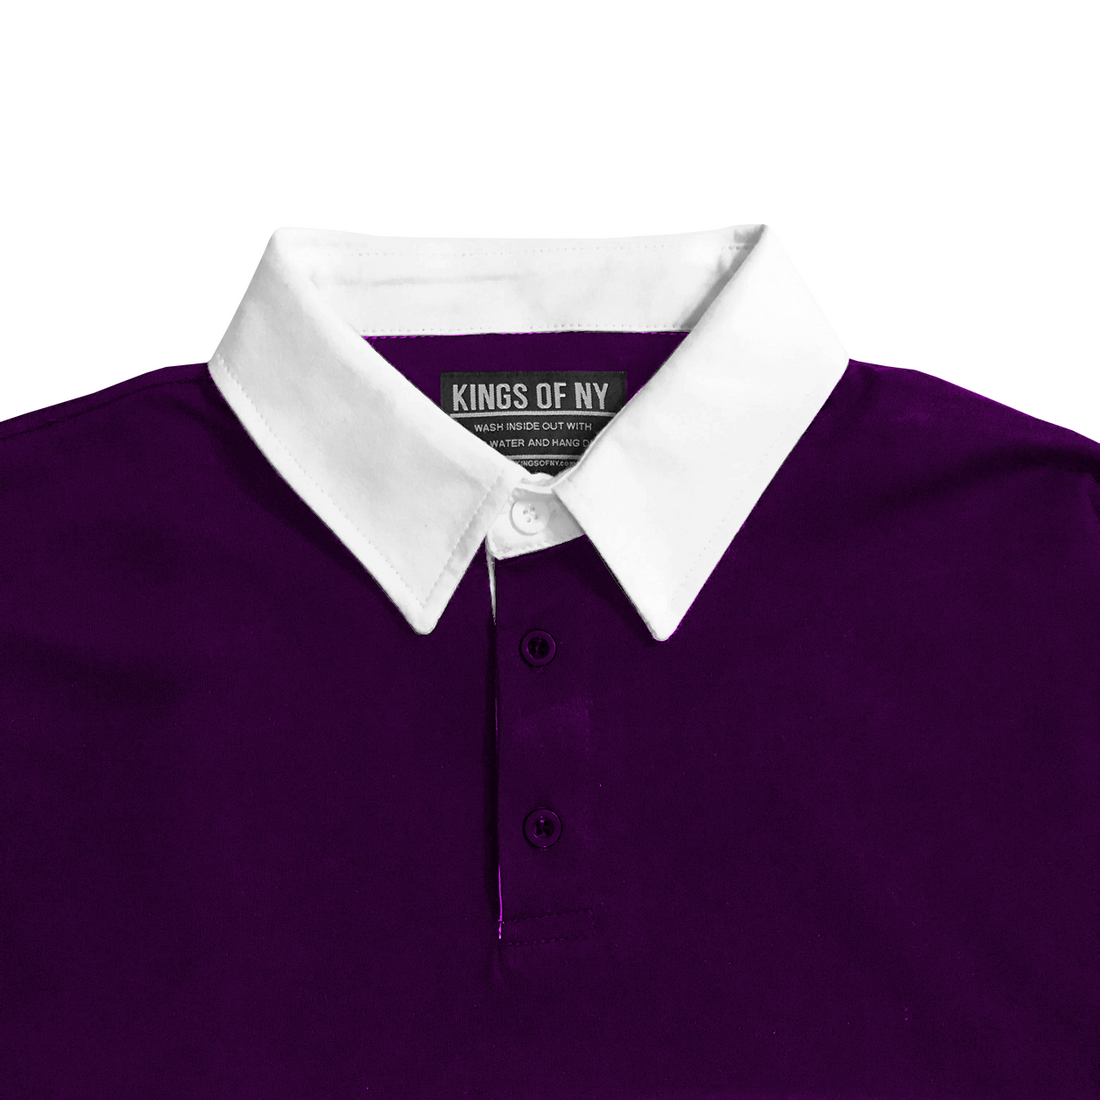 Mens Purple and White Striped Long Sleeve Polo Rugby Shirt